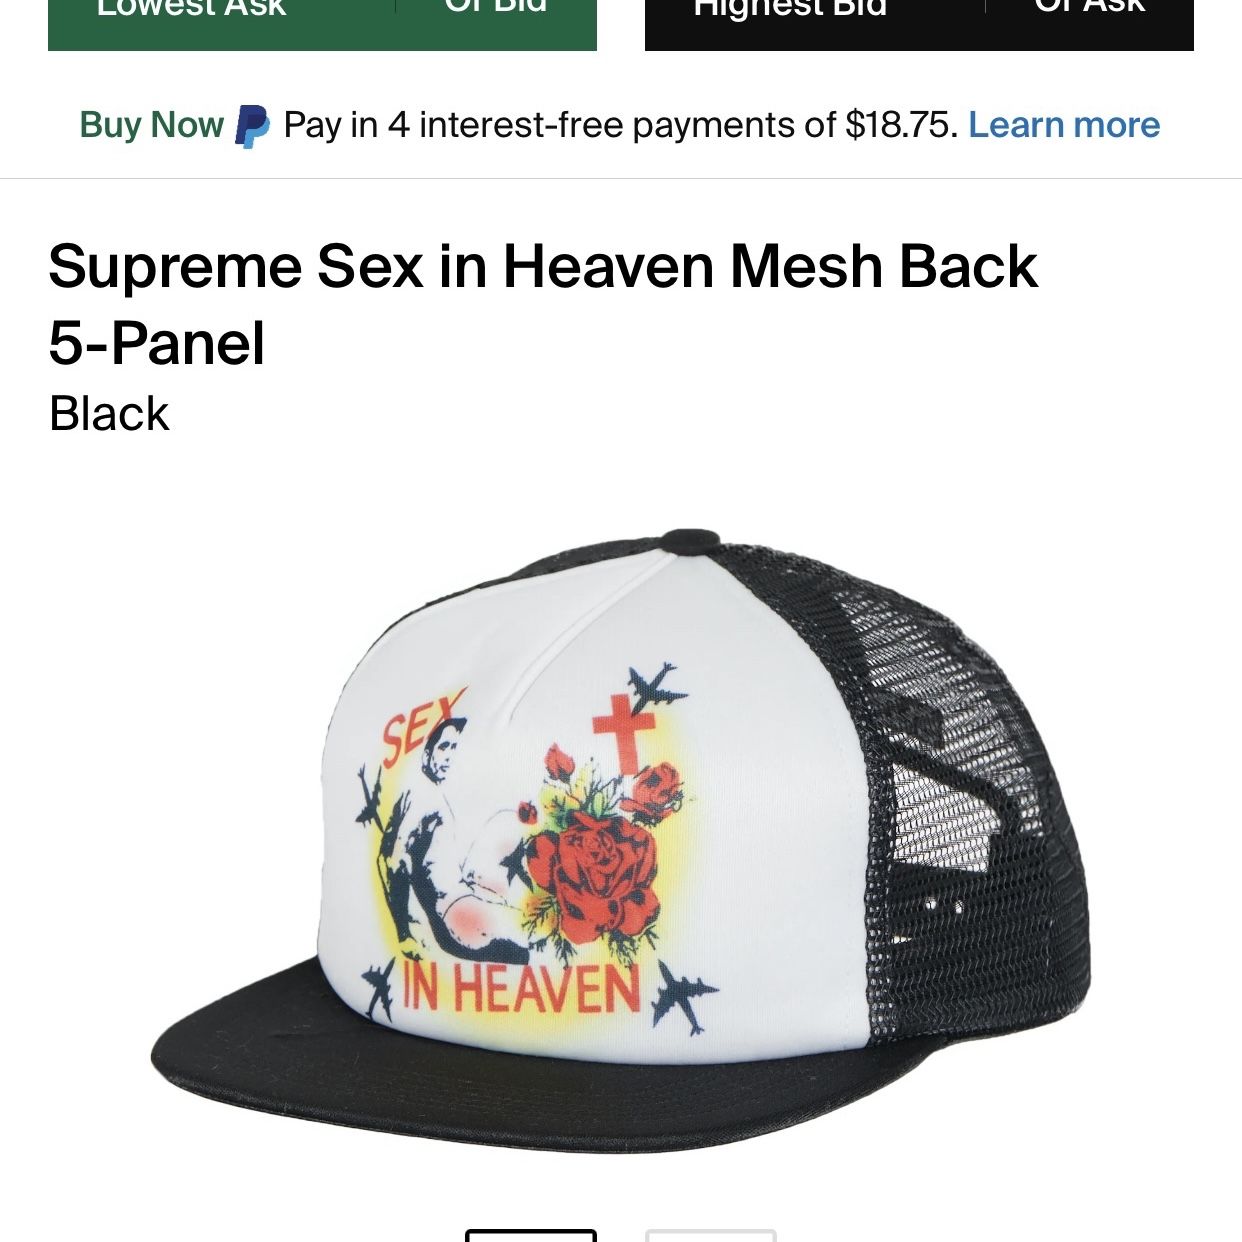 Supreme Sex In Heaven Mesh Hat for Sale in Brooklyn, NY - OfferUp